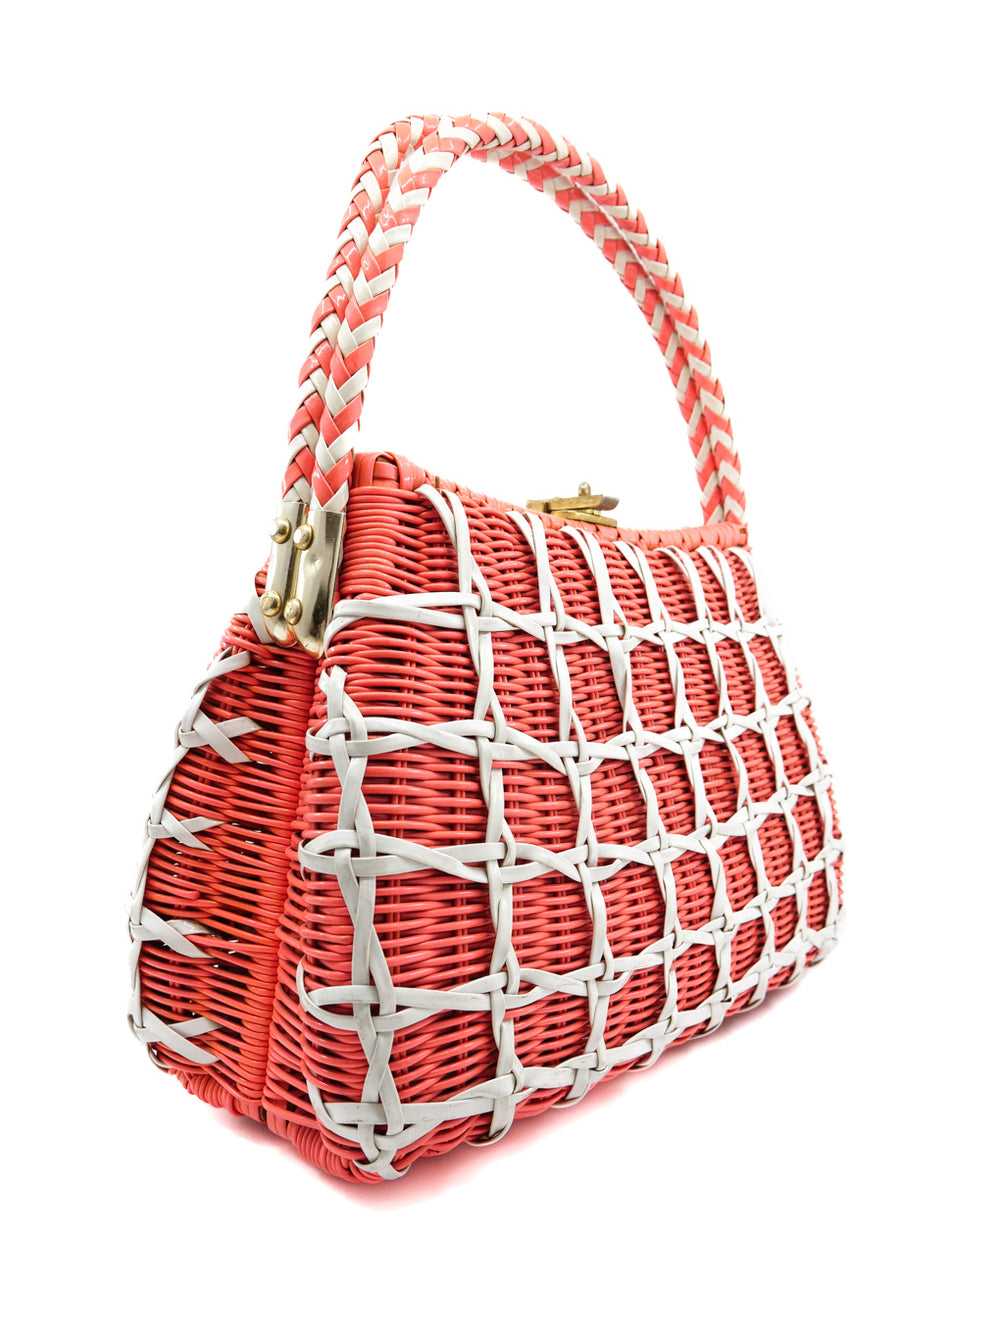 Coral Wicker Woven Basket Bag - image 5